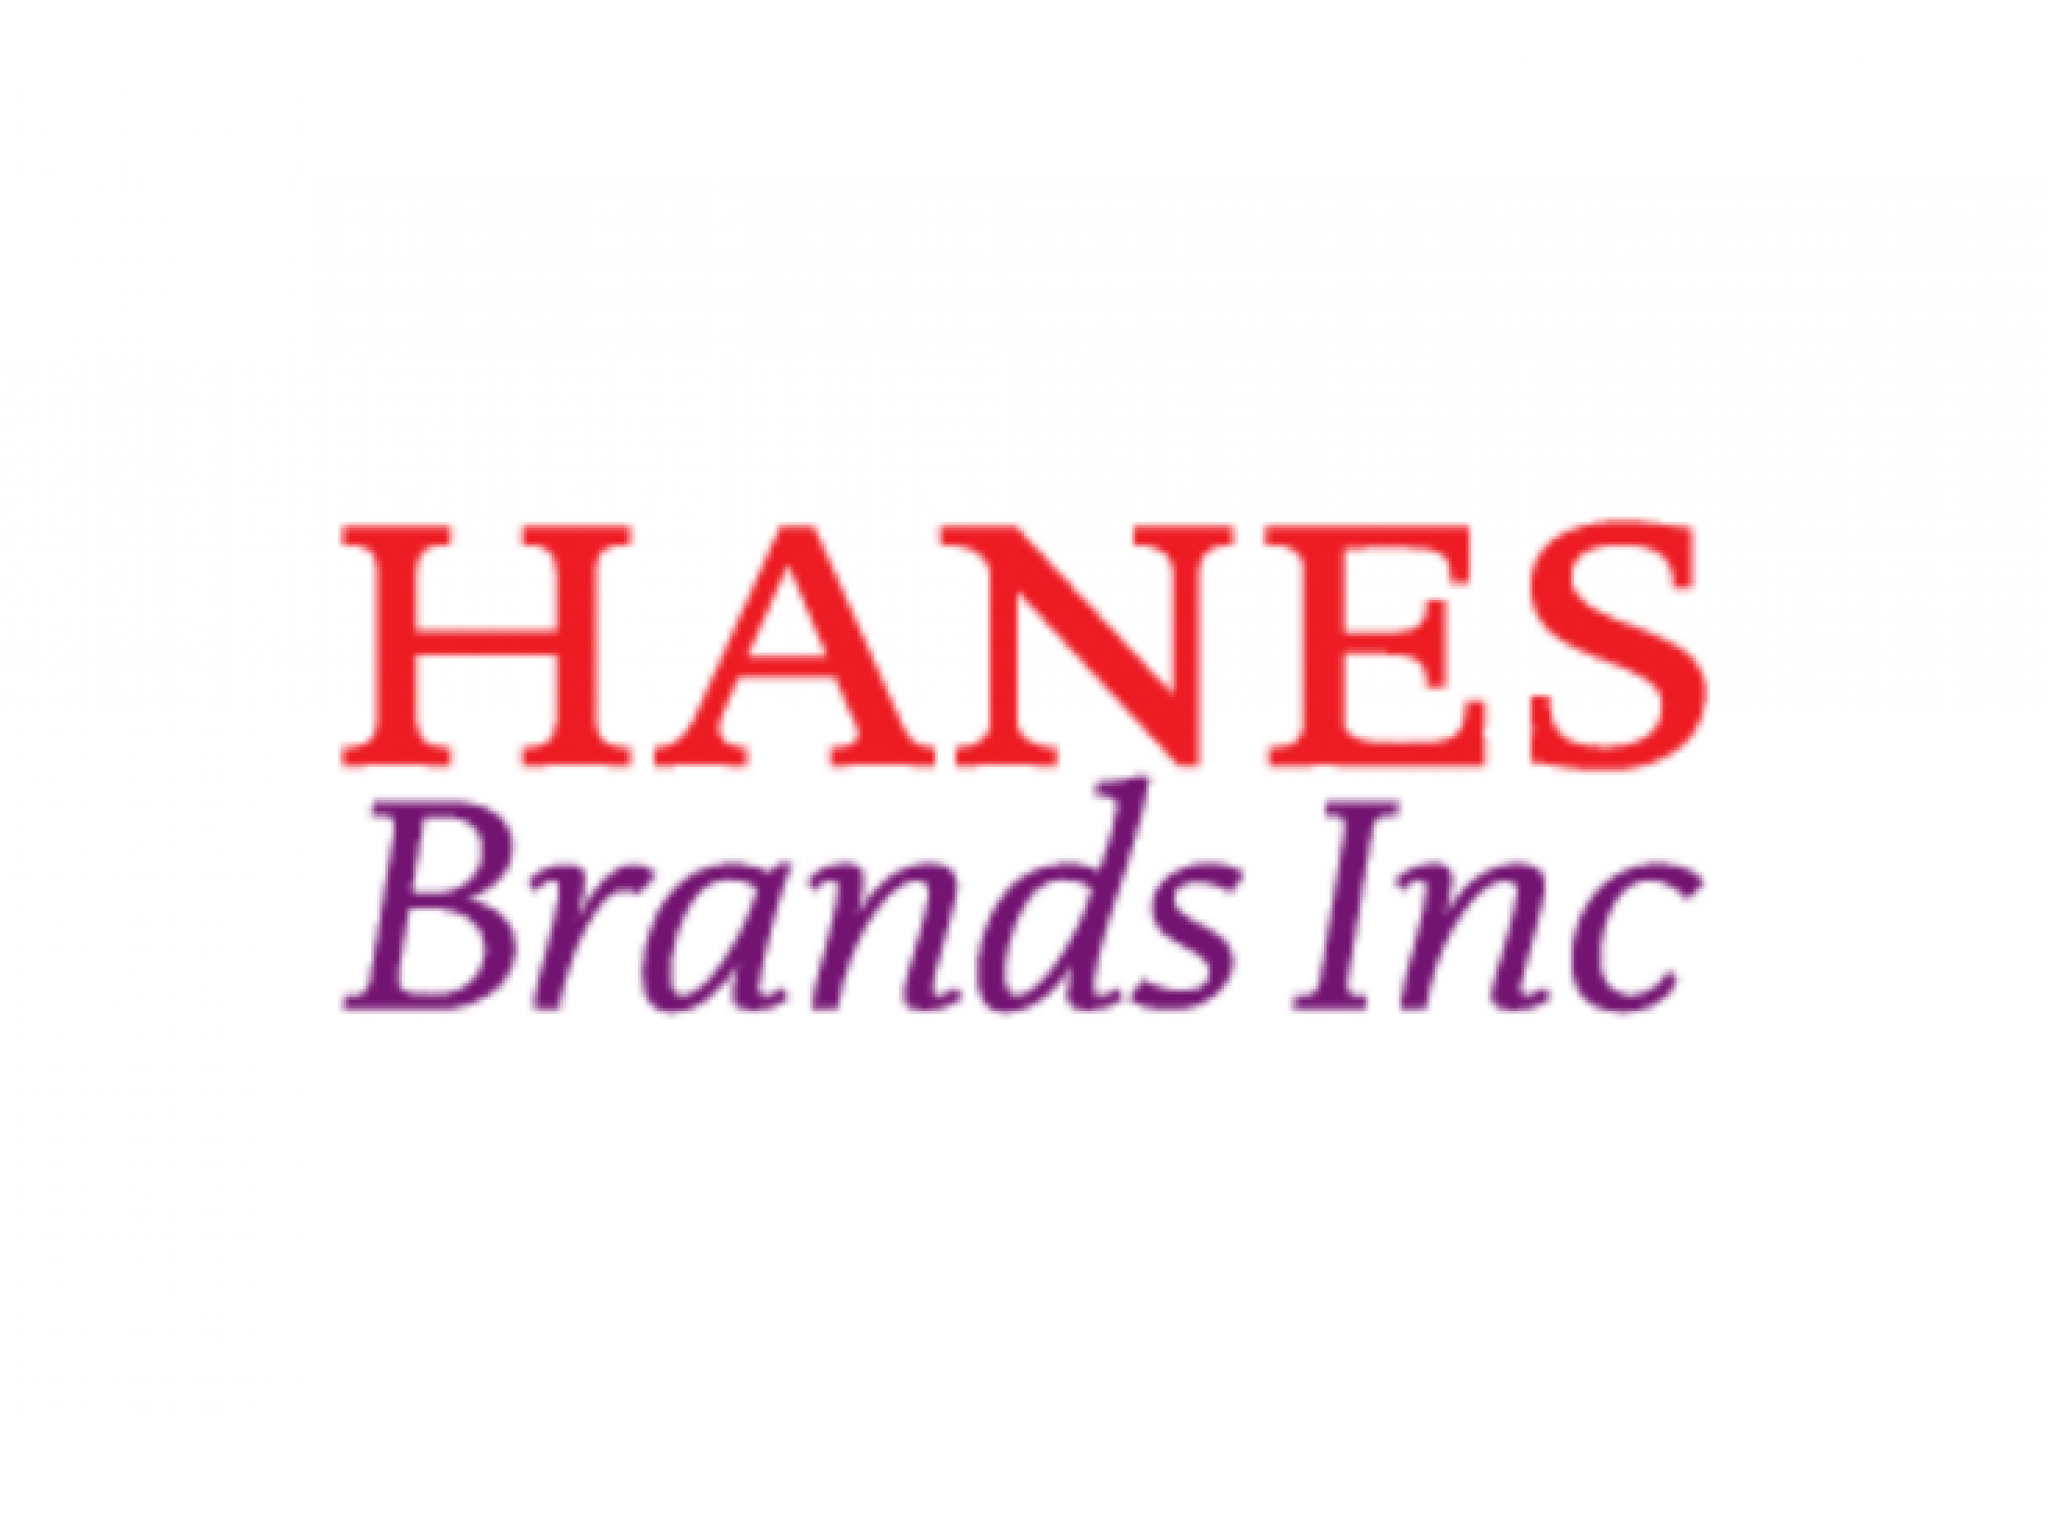  hanesbrands-5-after-q1-results---heres-why 